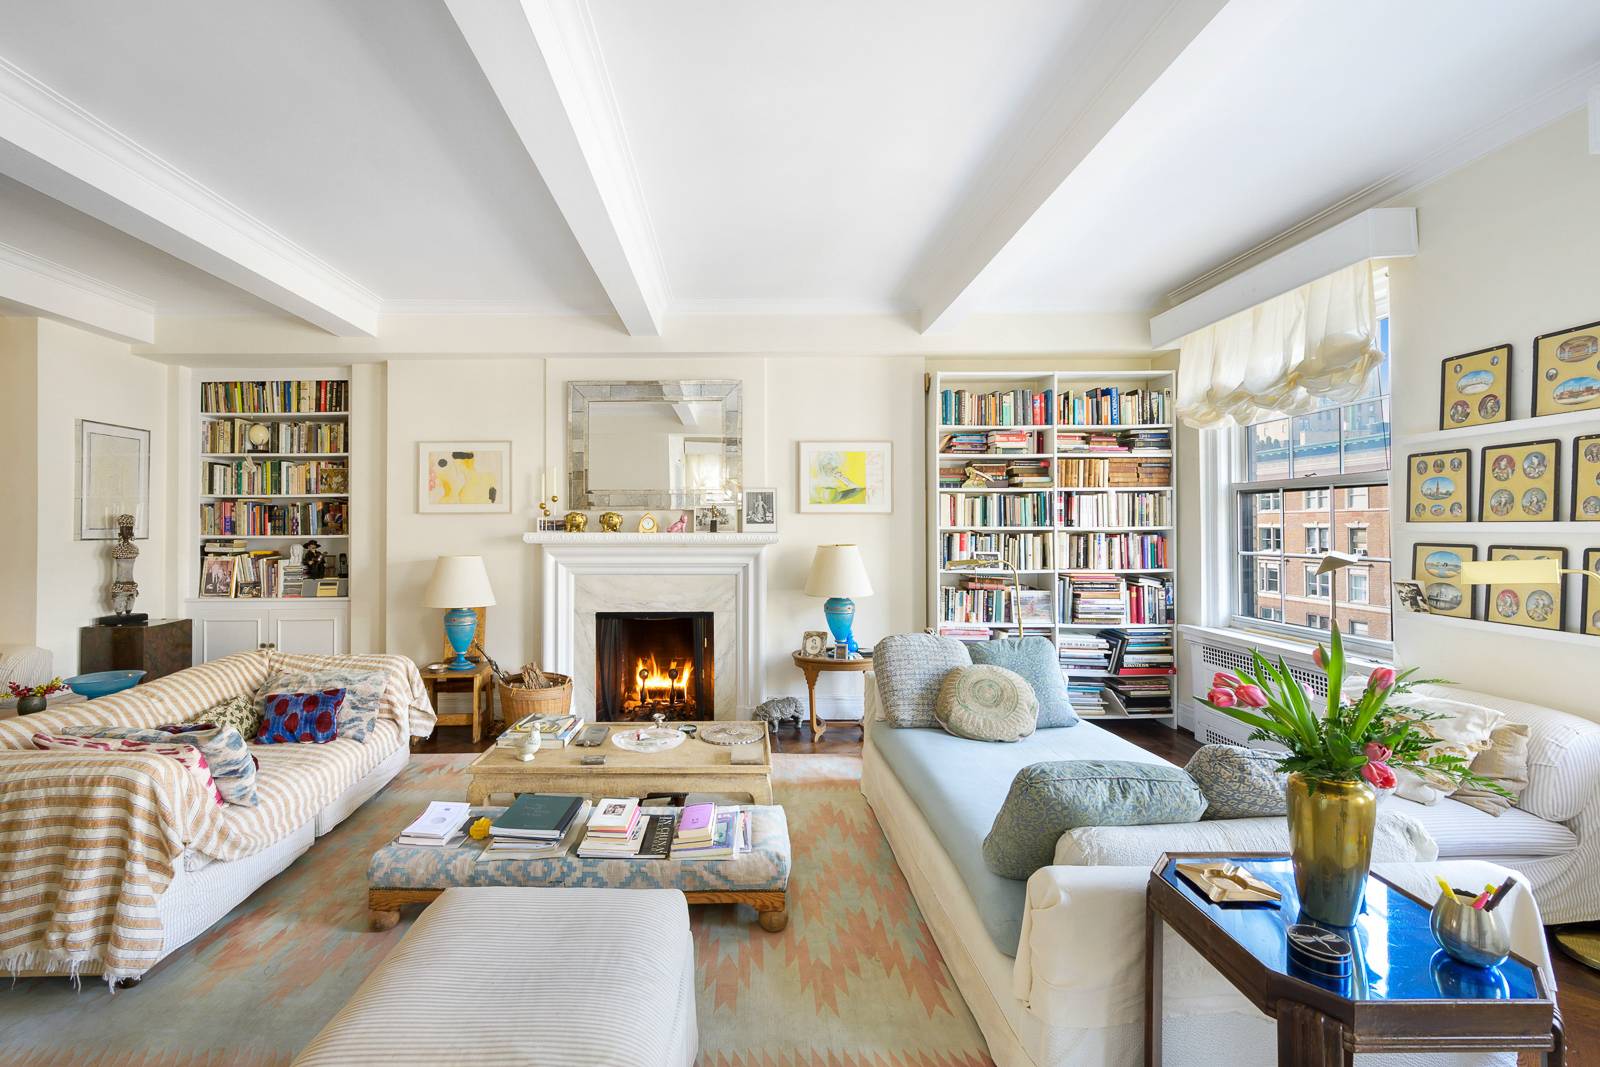 Perched high above one of the most desirable stretches of Park Avenue, this gracious prewar cooperative is flooded with natural sunlight through all four exposures, accentuated by large French windows ...